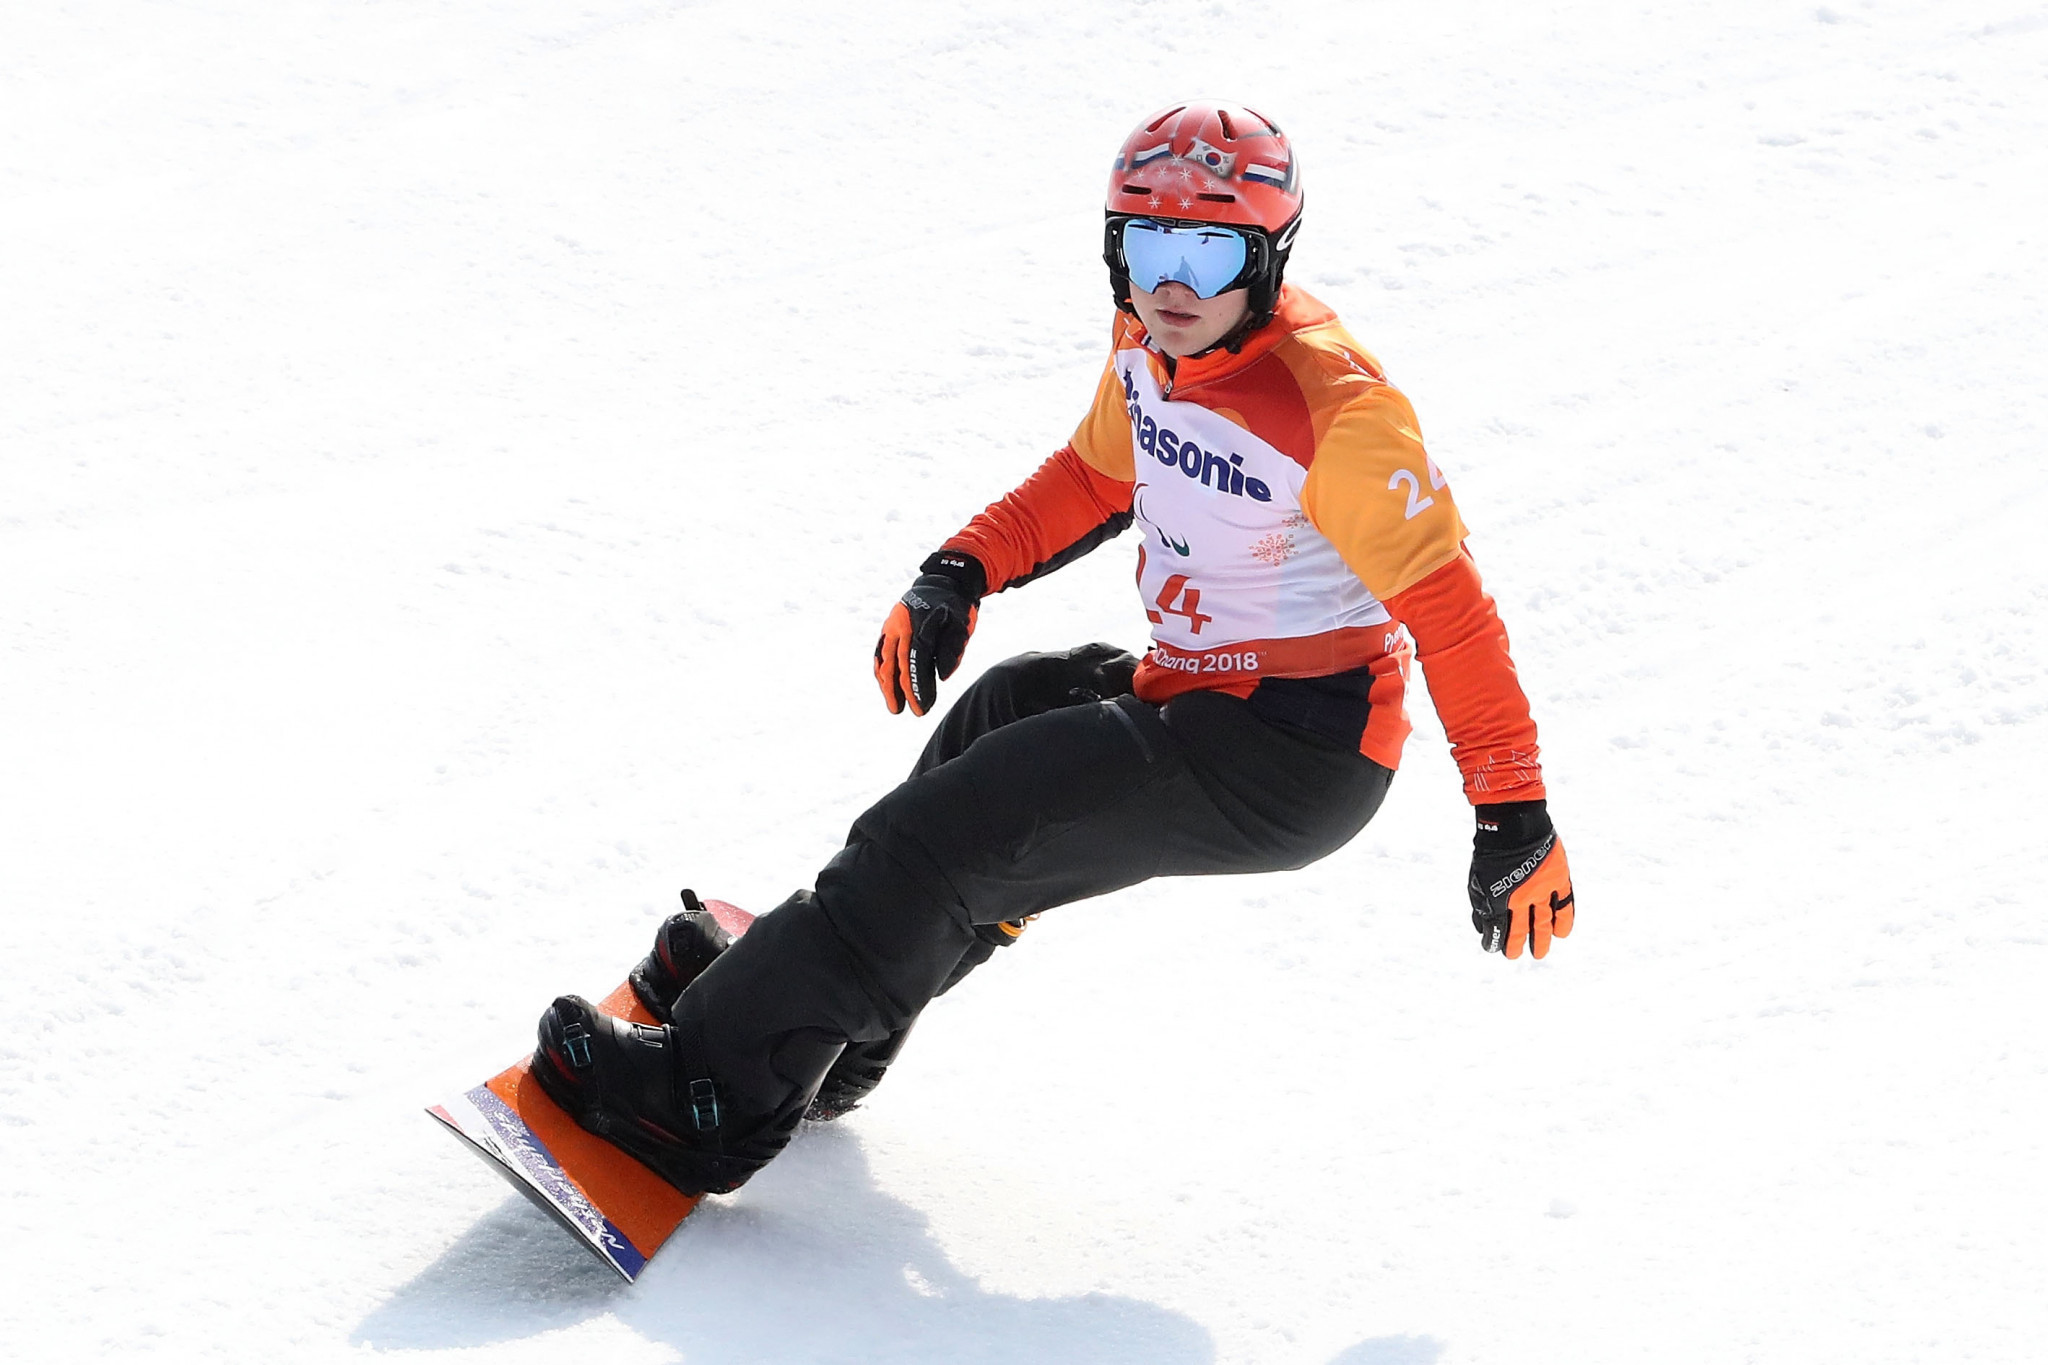 The Netherlands Chris Vos won a silver medal at Pyeongchang 2018 in snowboard cross bu triumphed at the World Para Snowboard World Cup before a home crowd in Landgraaf today ©Getty Images